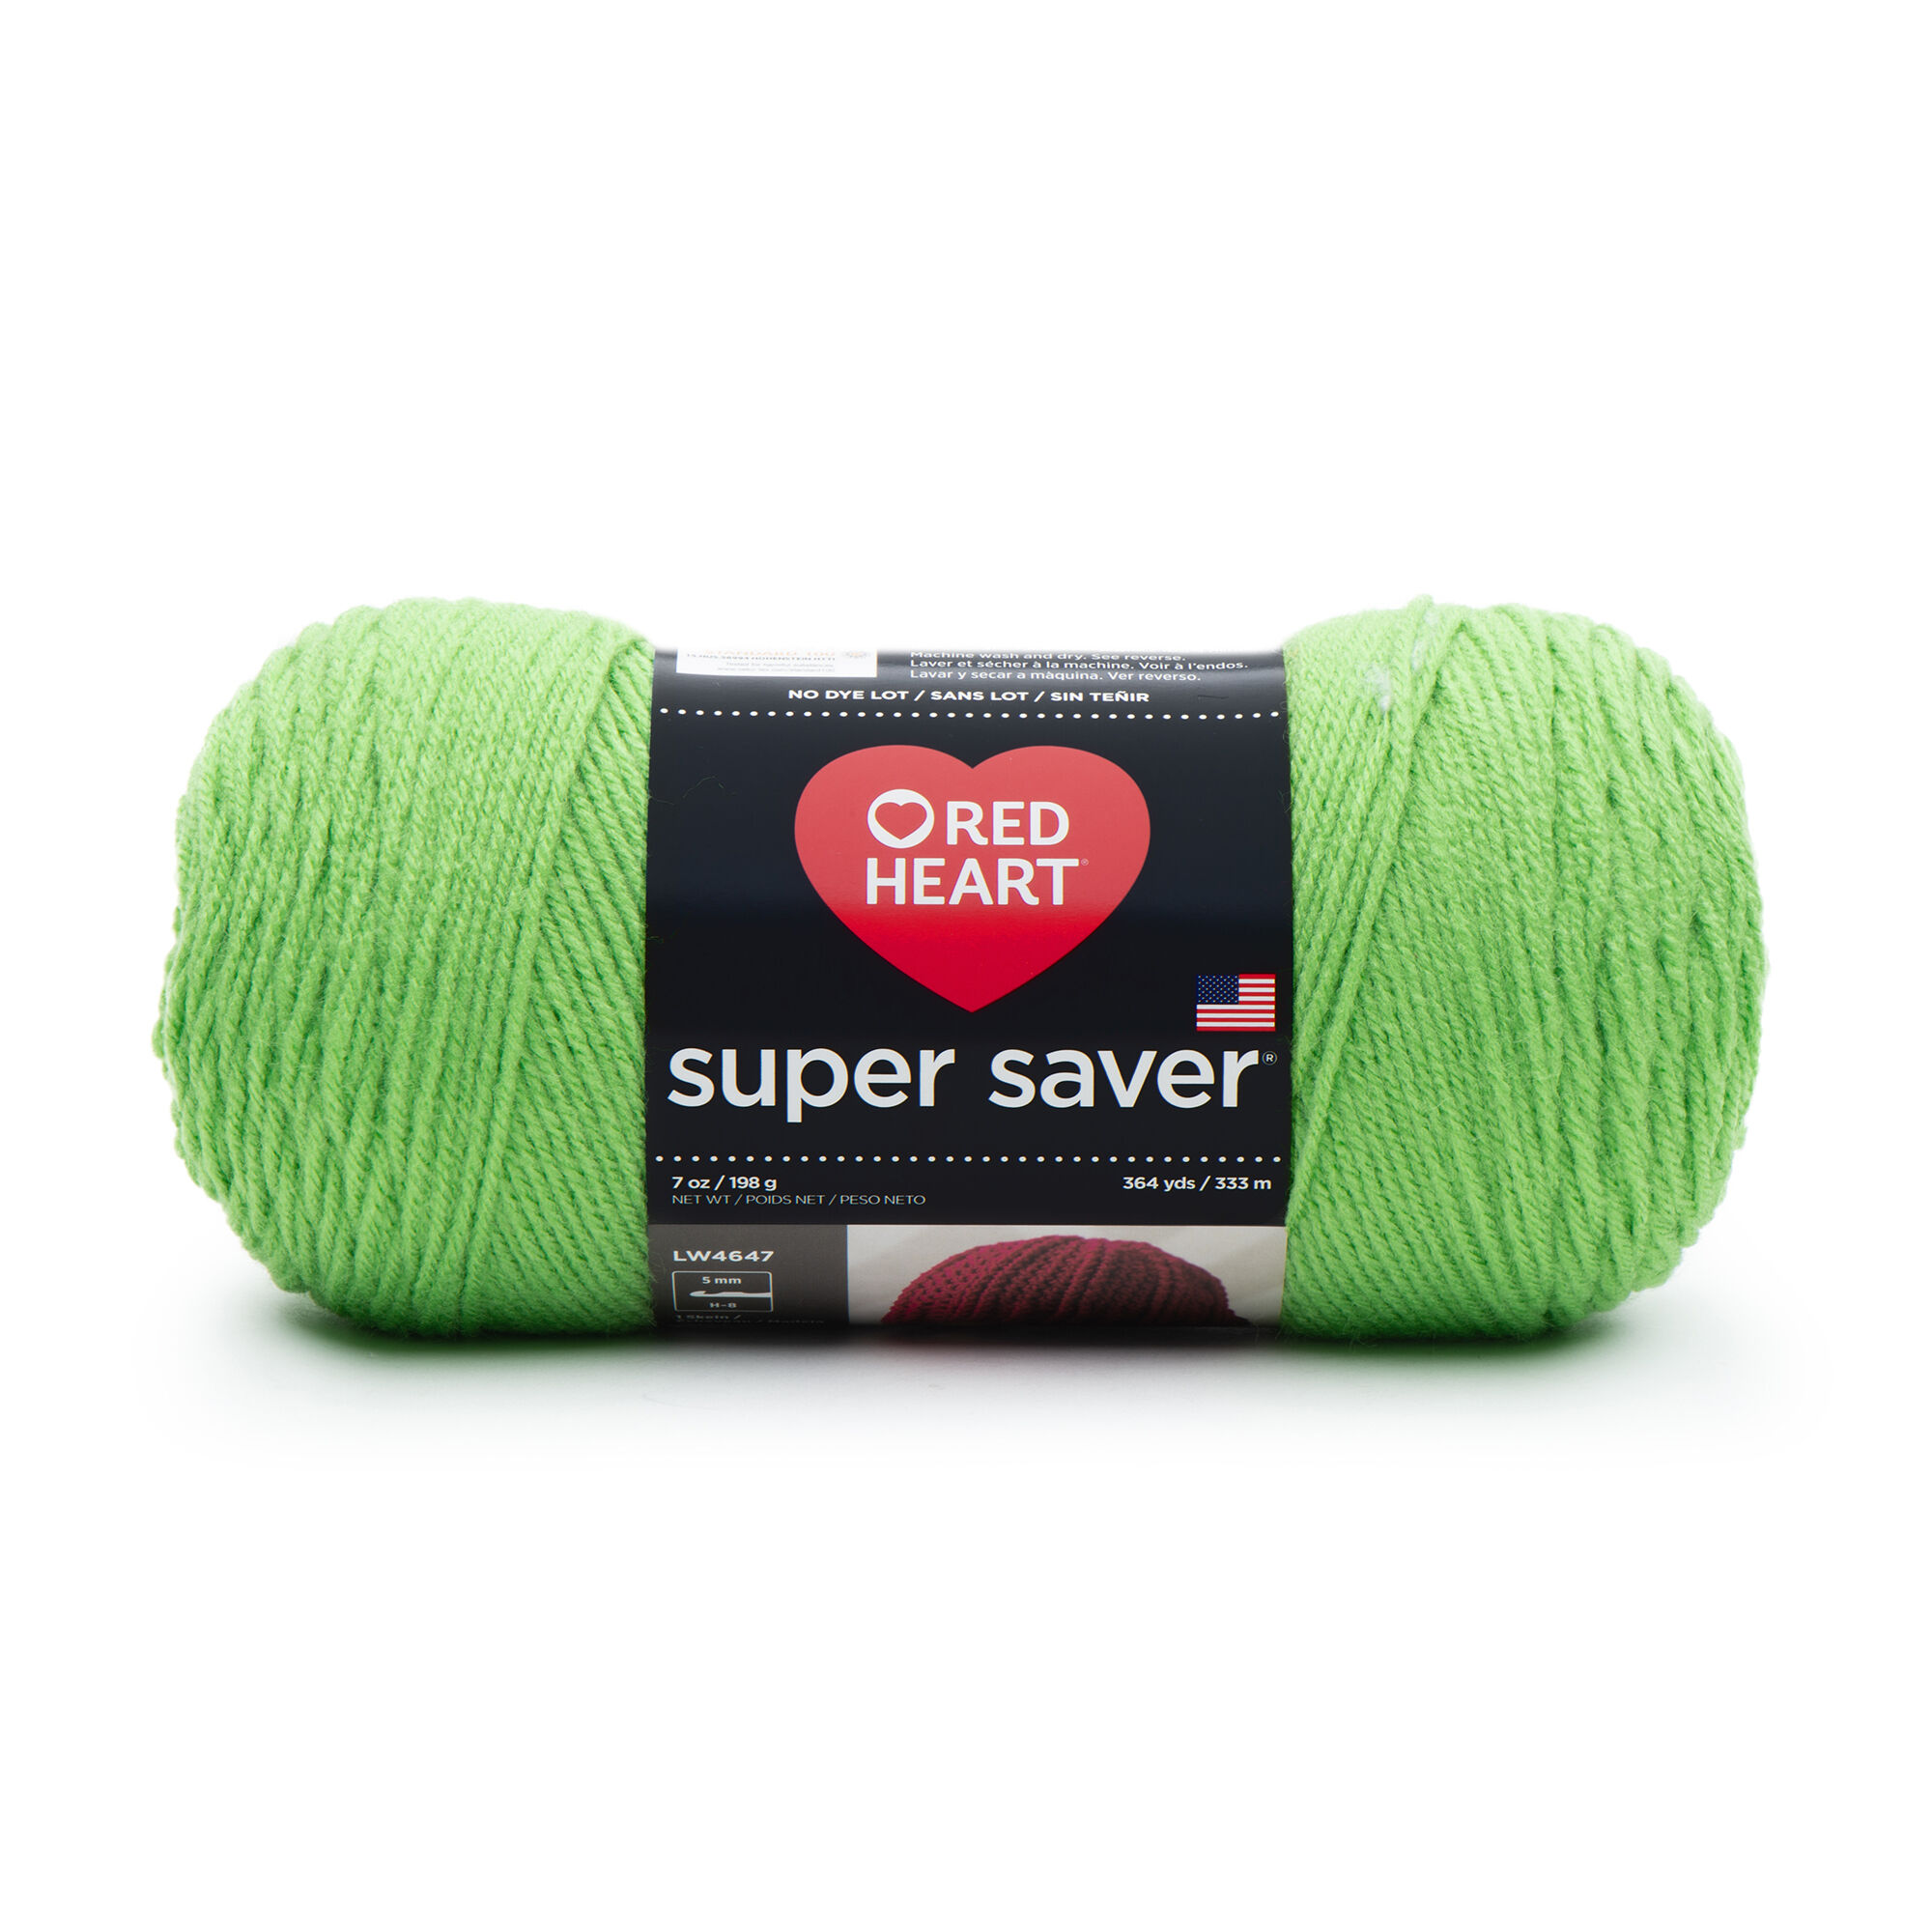 RED HEART SUPER SAVER ECON SPRING GRN - image 1 of 14